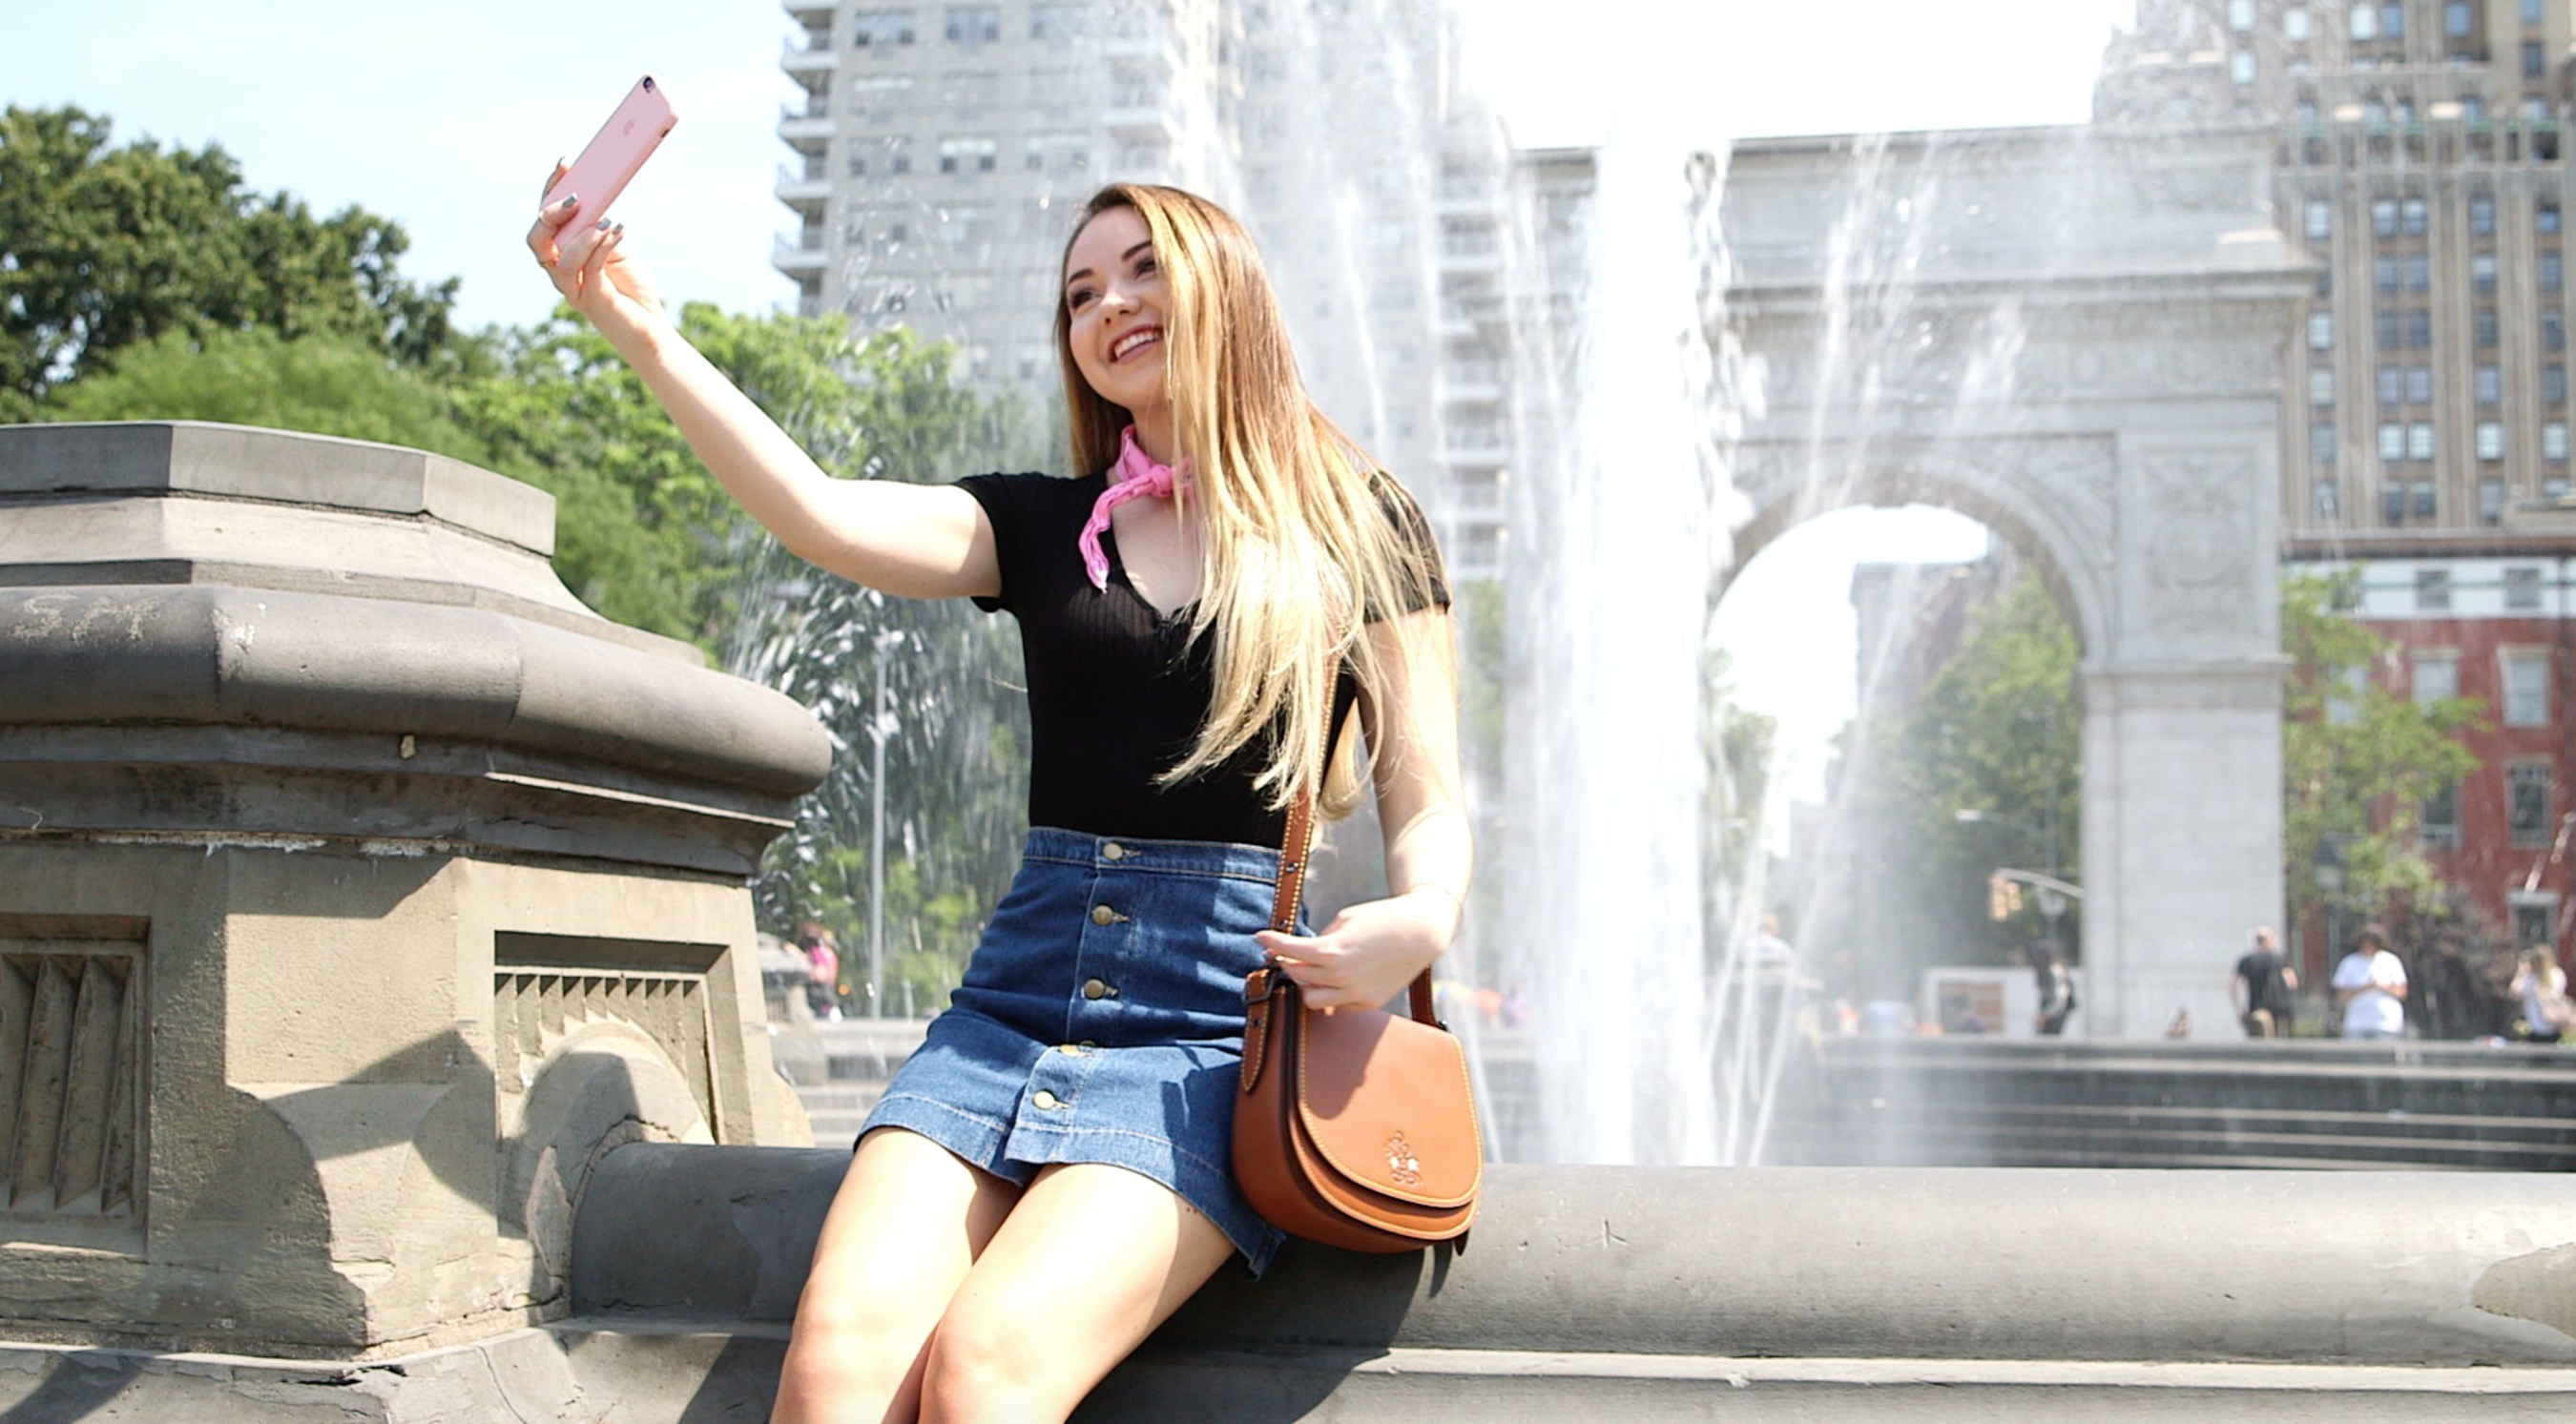 Host Meredith Foster explores New York City for "Destination: Disney Style"